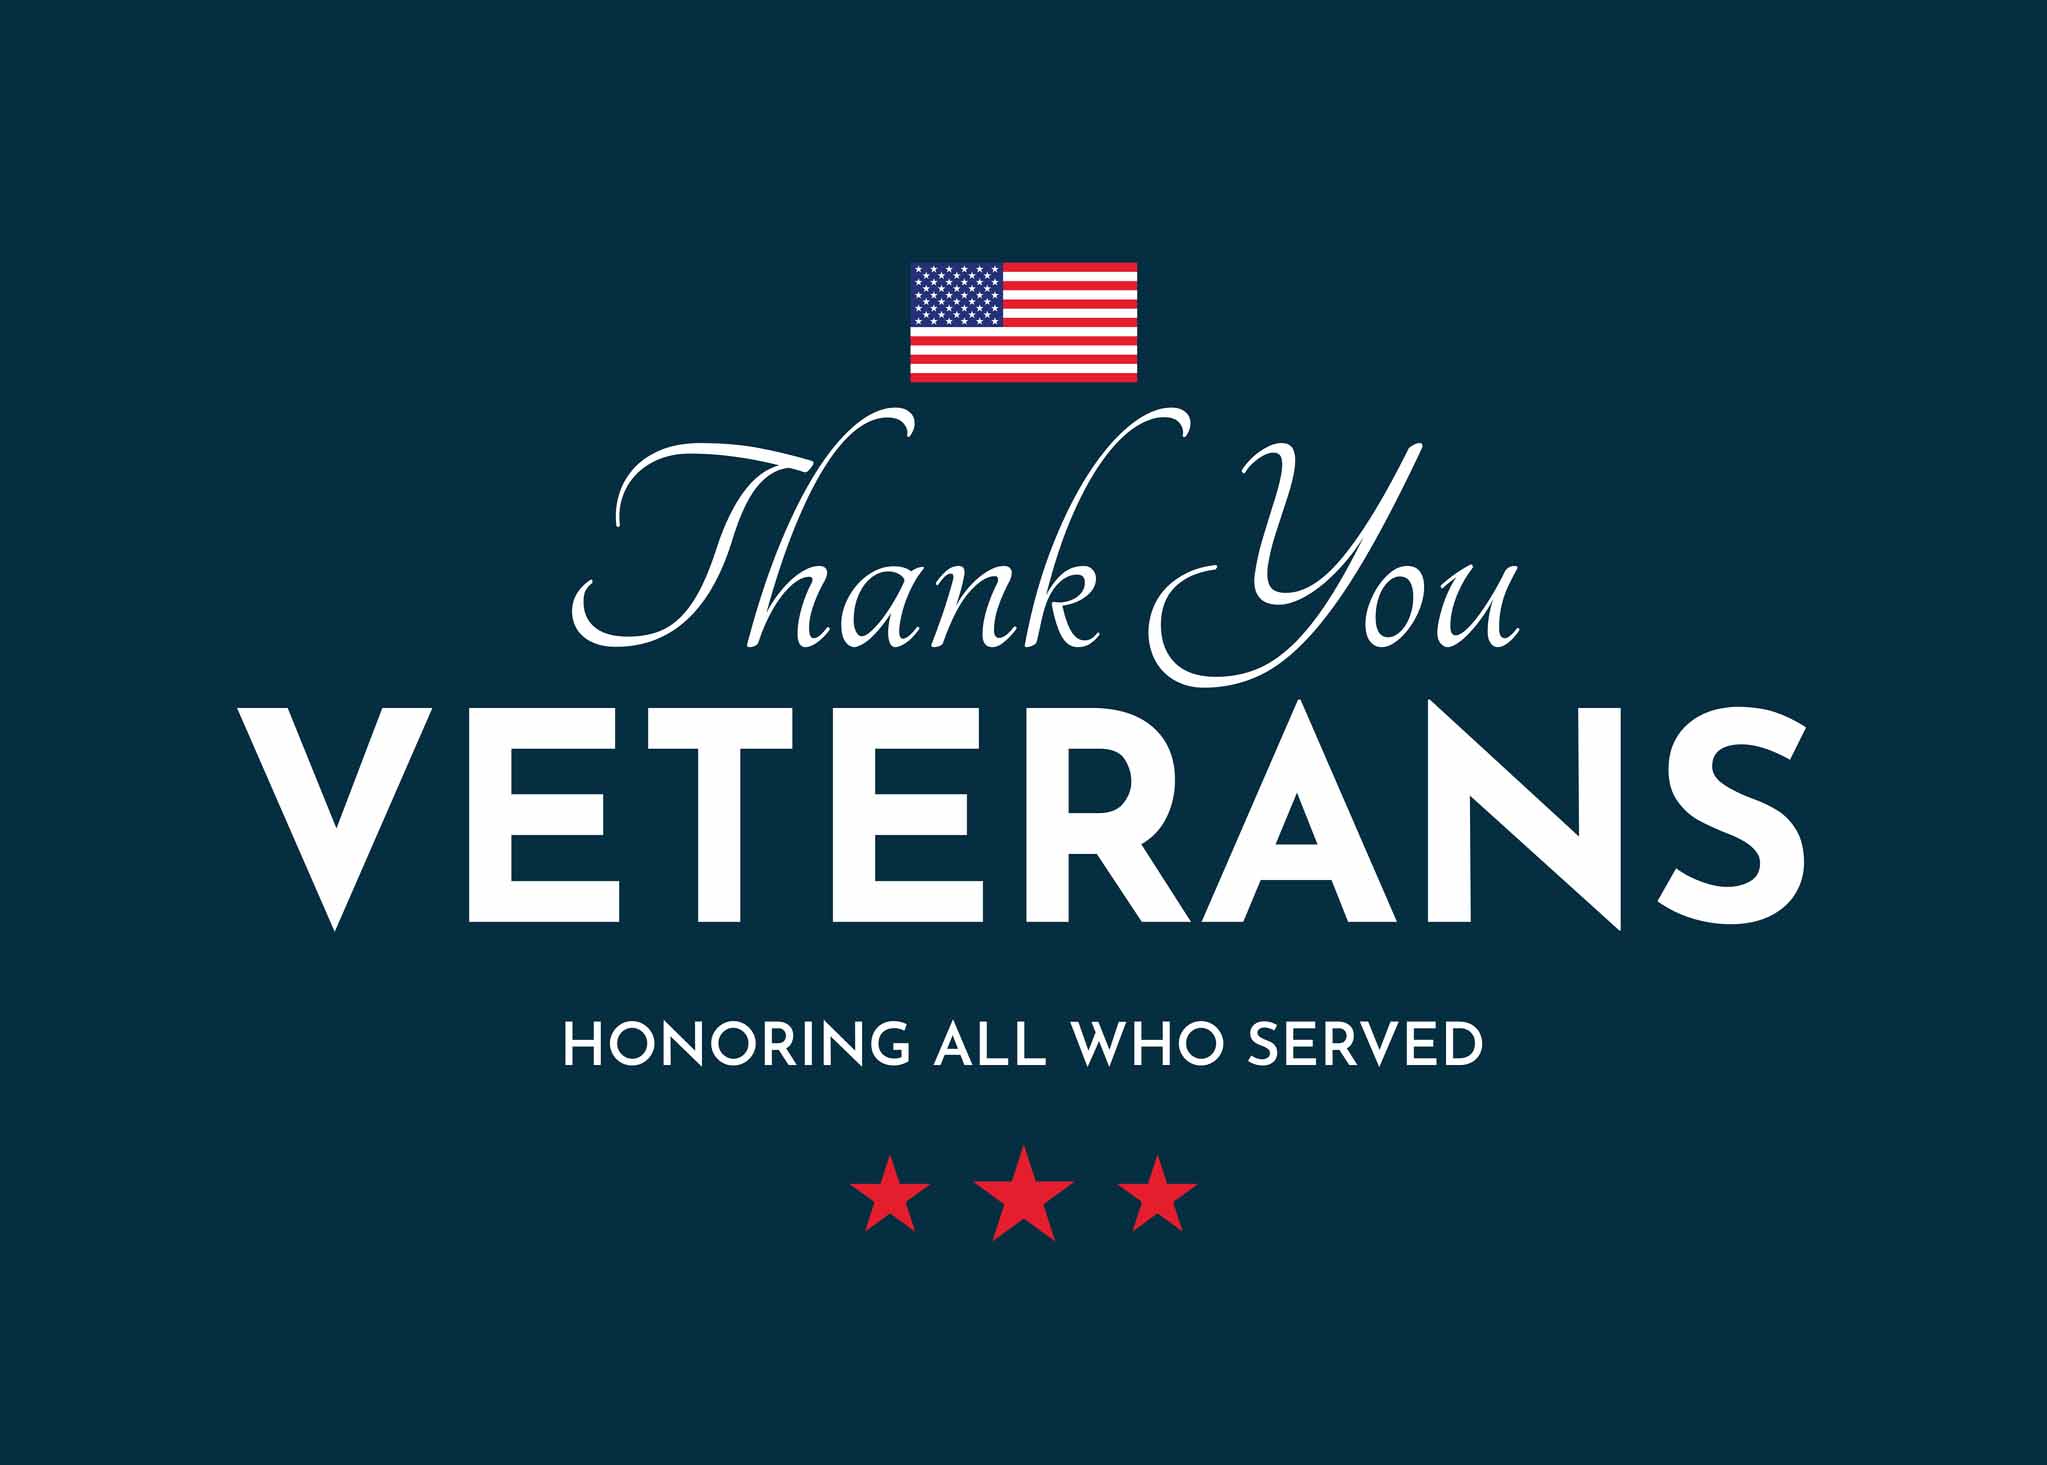 Text thanking veterans for their service on Veterans Day